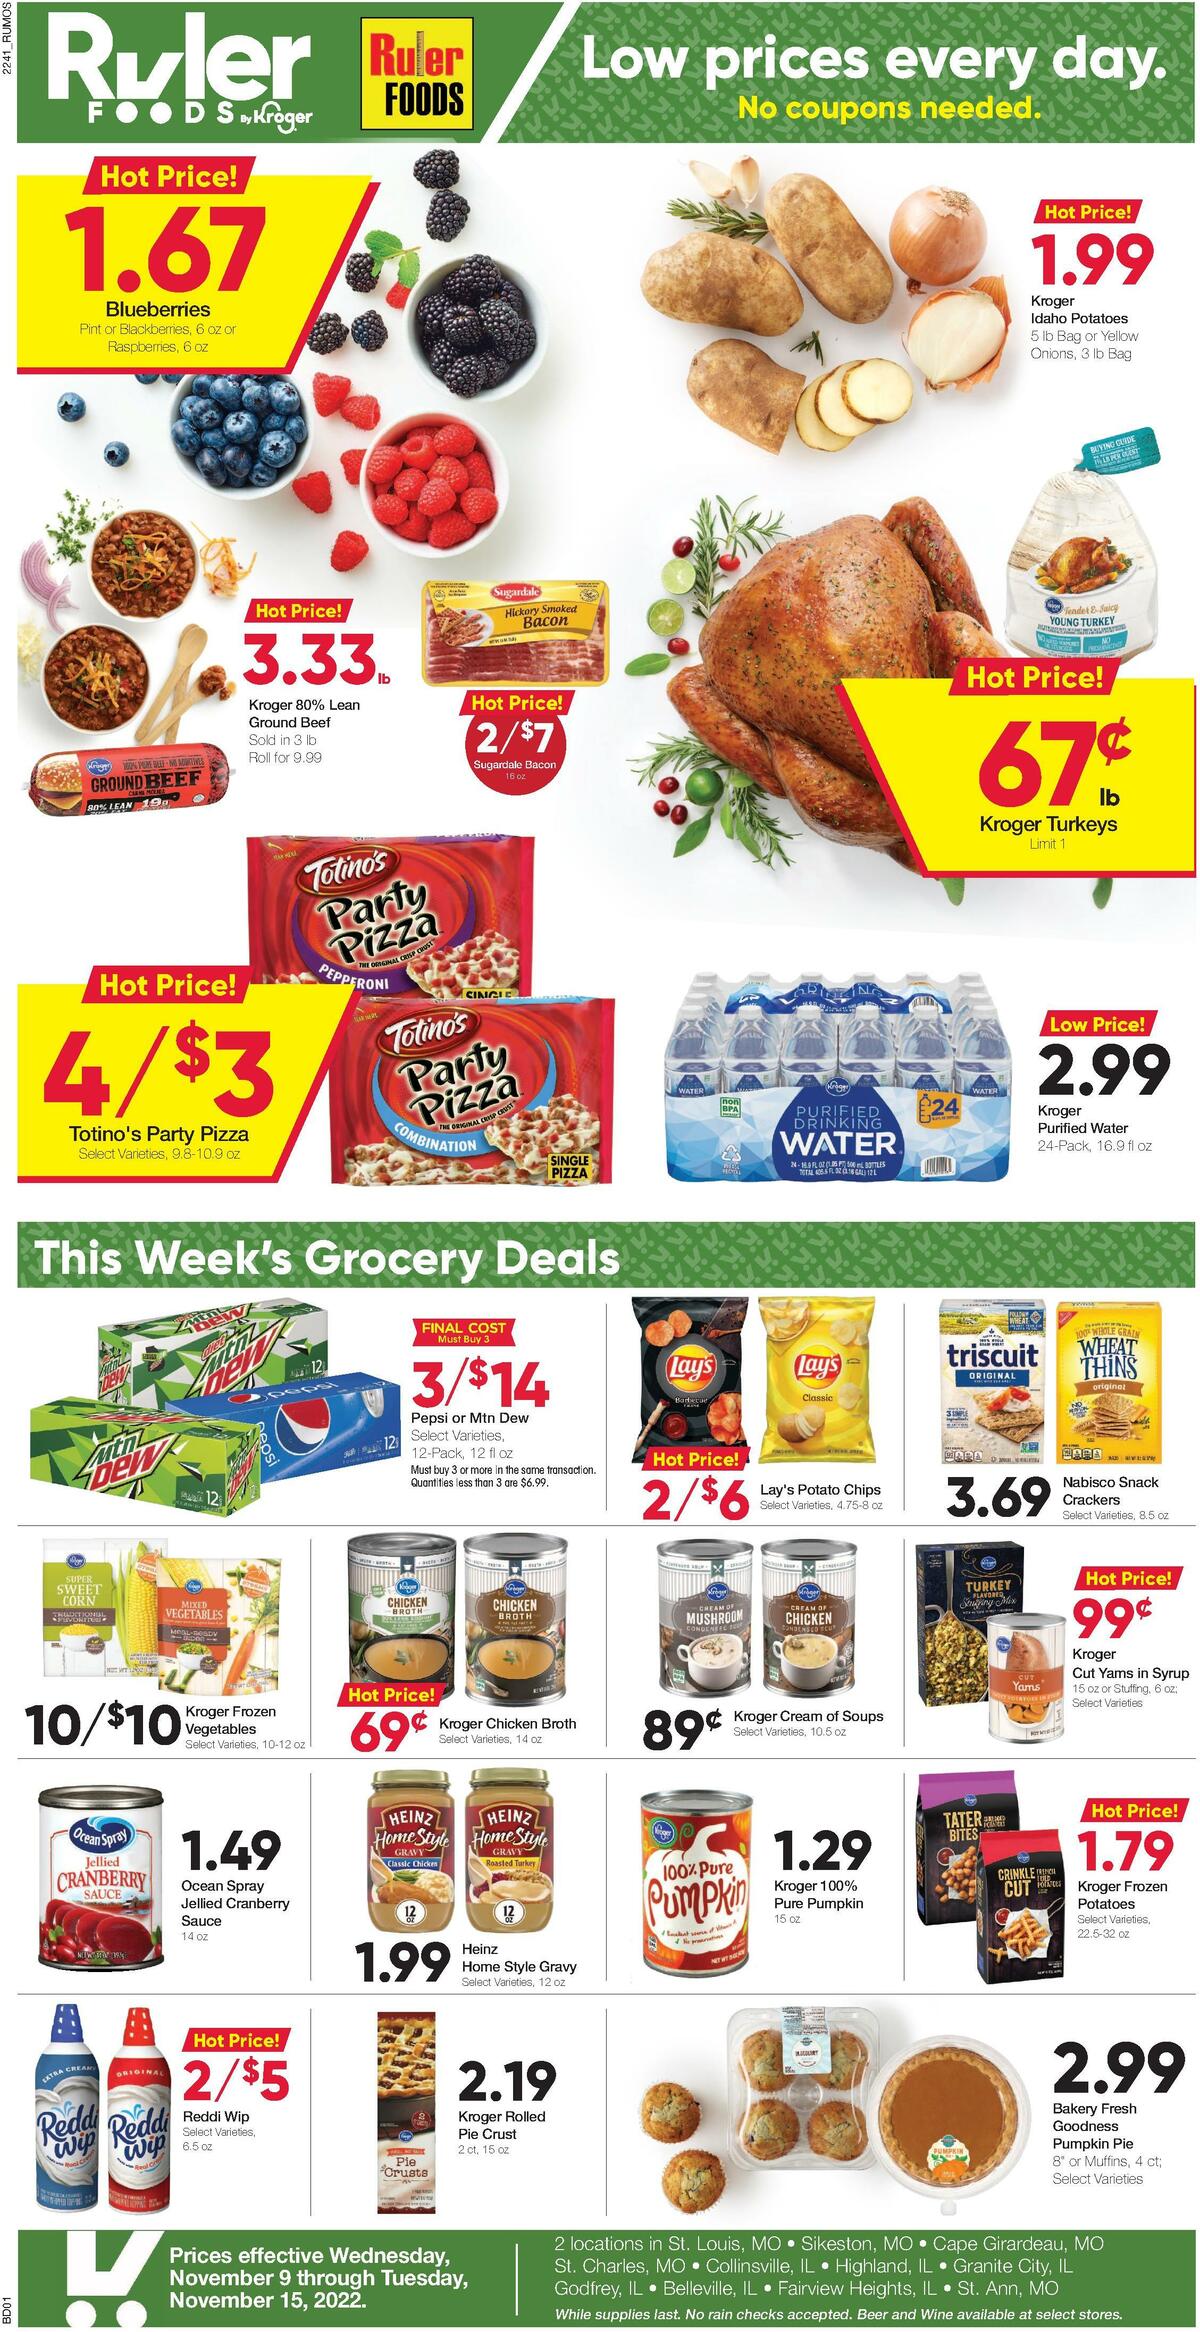 Ruler Foods Weekly Ad from November 9